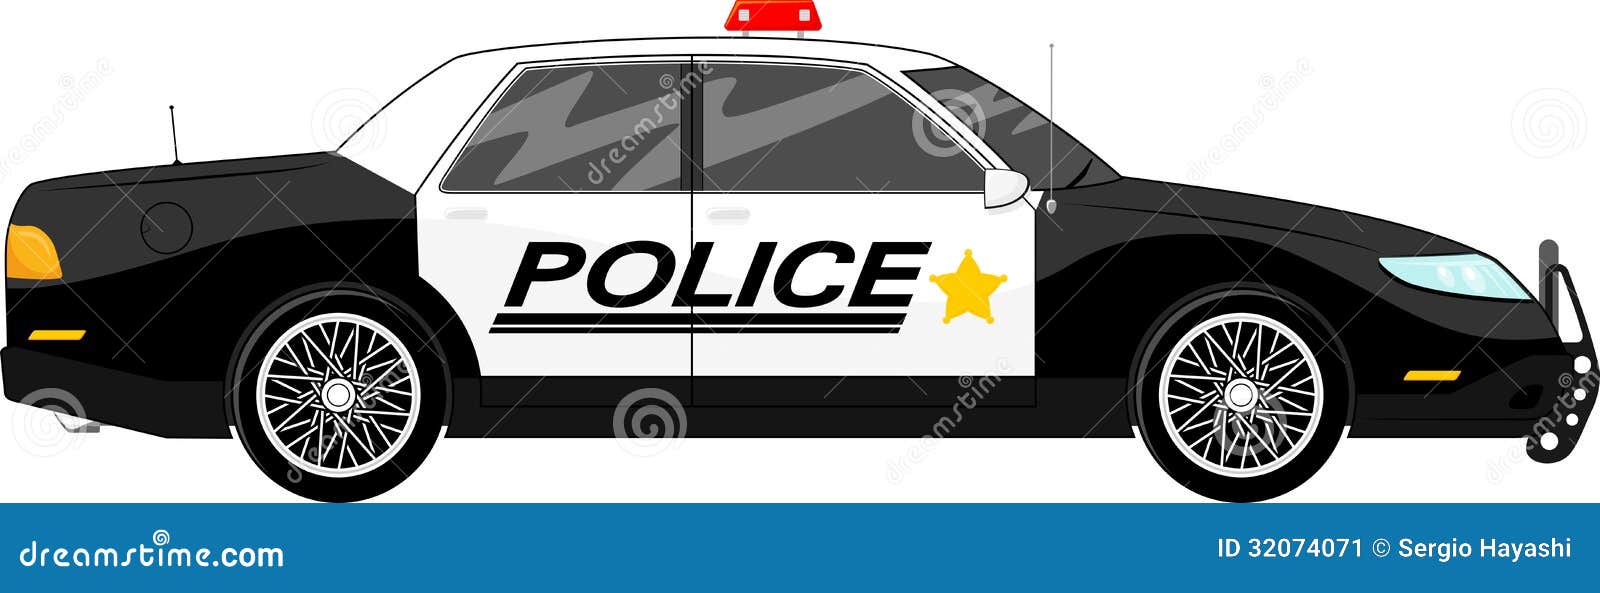 police car clipart black and white - photo #50